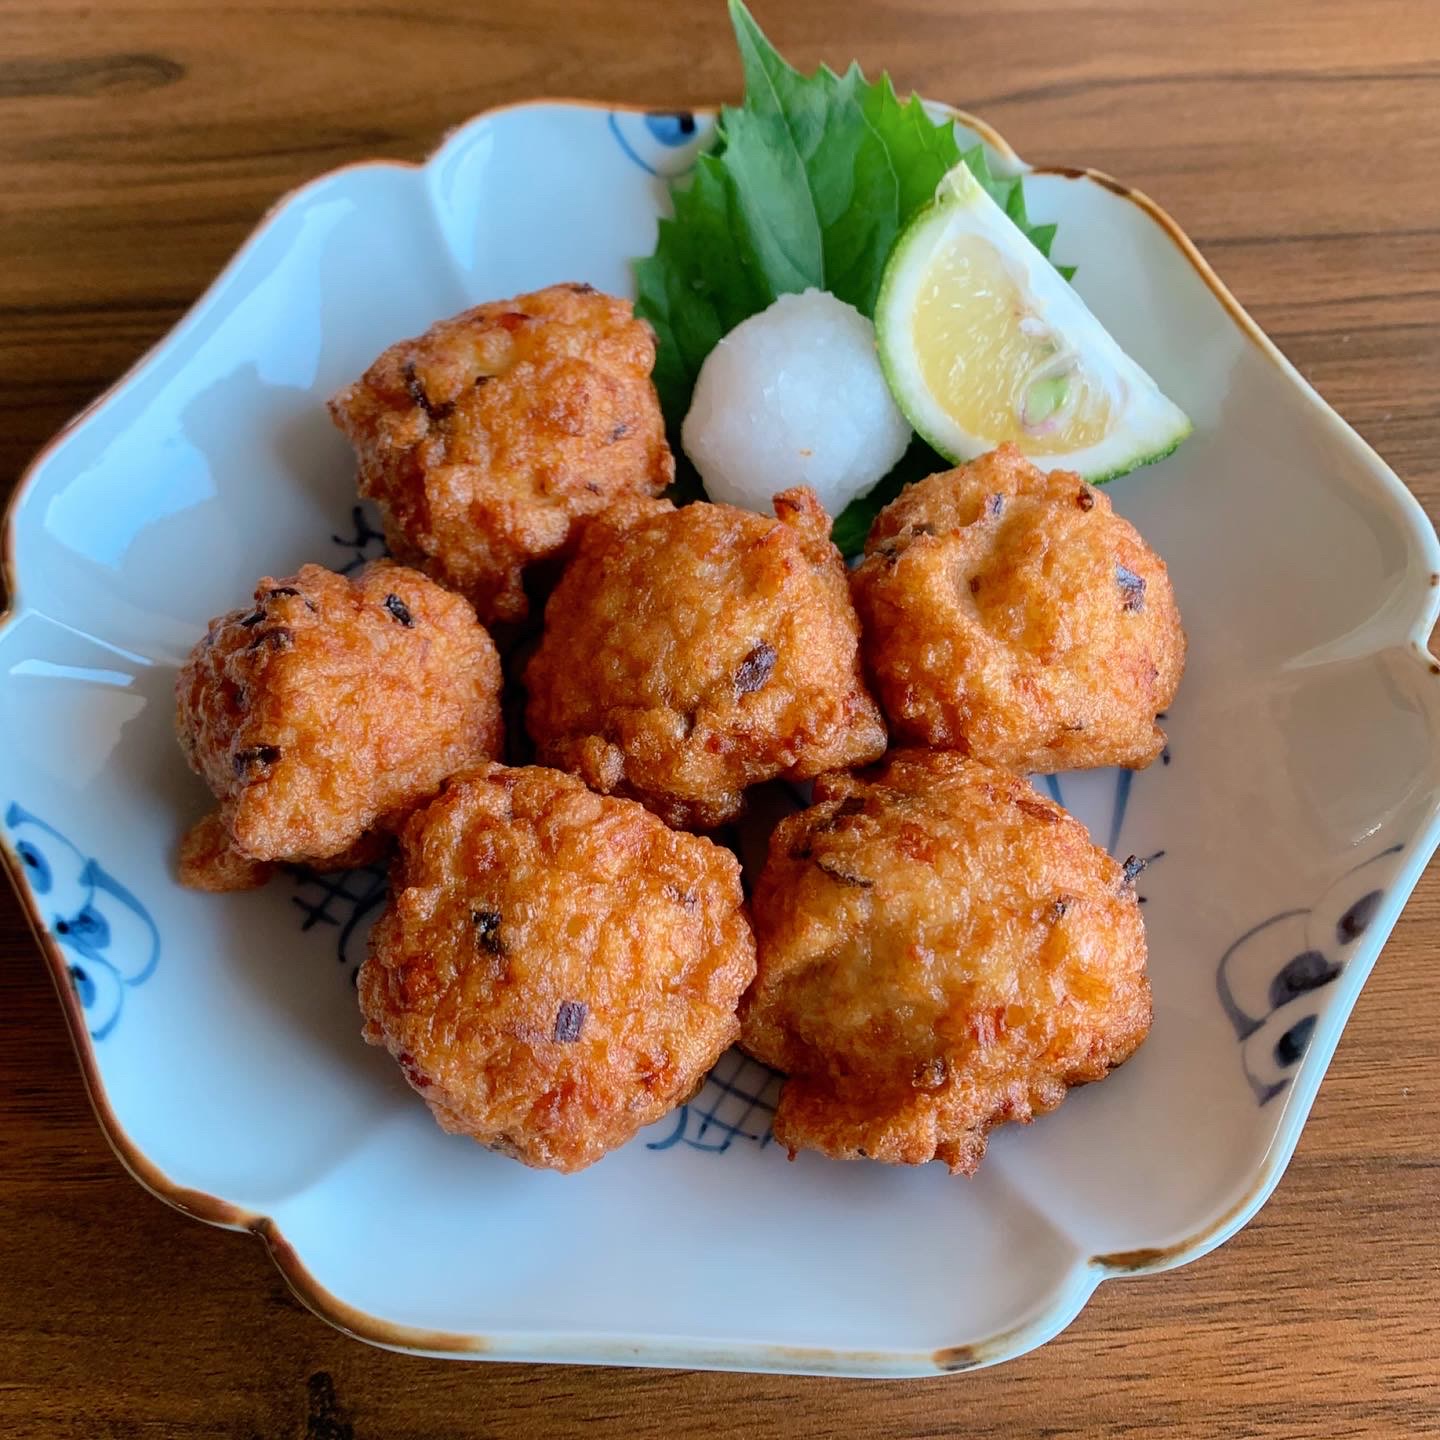 A homemade fish cake. It is made from tofu and paste of white fish (surimi）. It has a soft and fluff